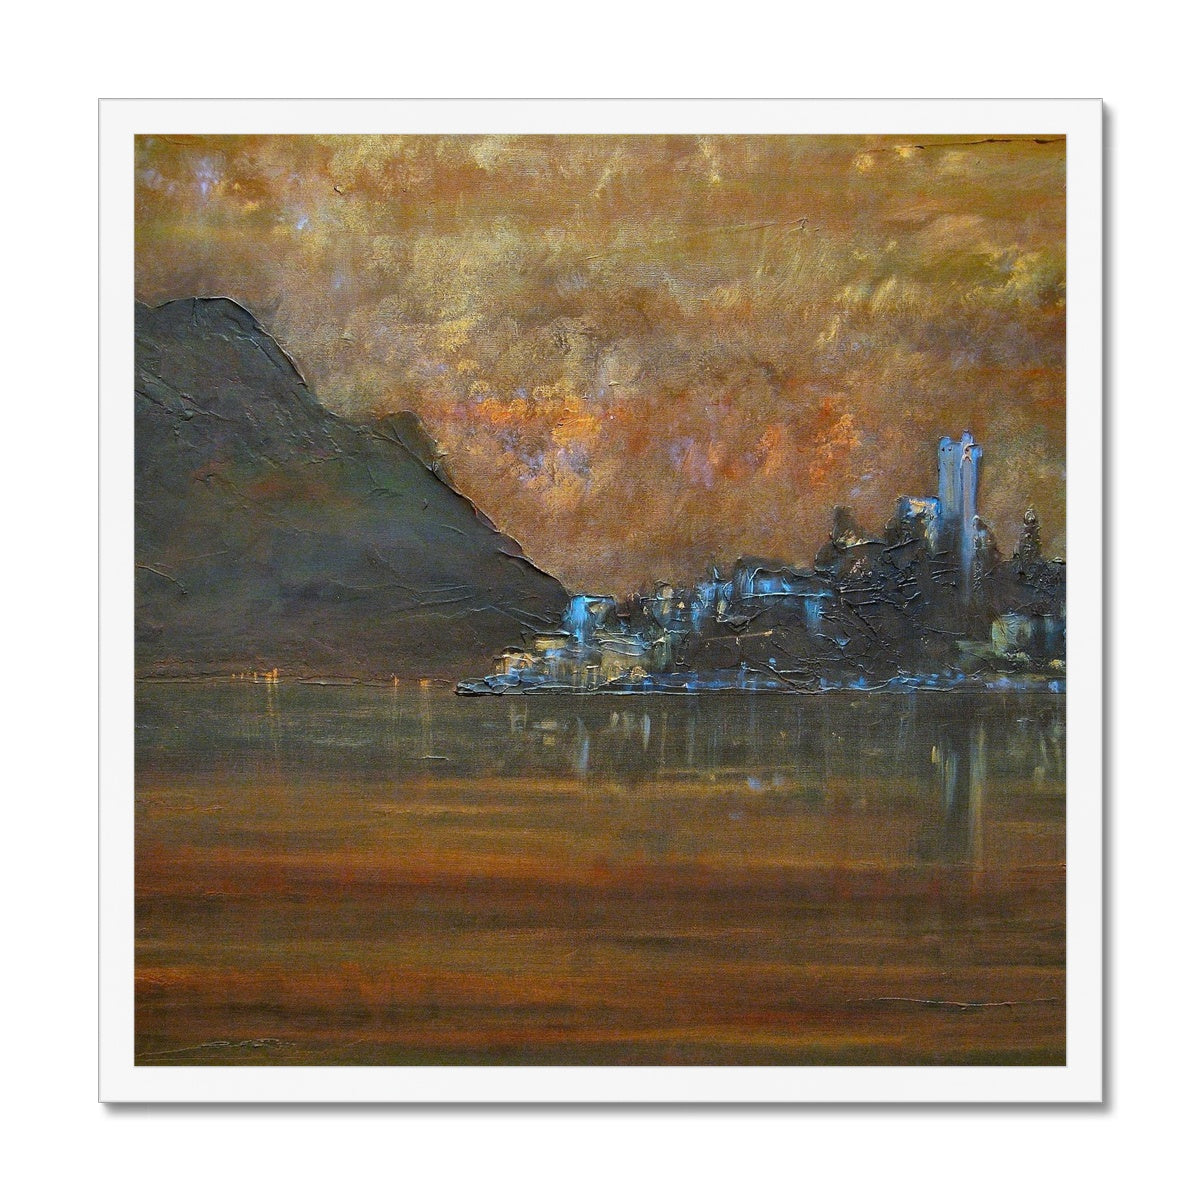 Lake Garda Dusk Italy Painting | Framed Prints From Scotland-Framed Prints-World Art Gallery-20"x20"-White Frame-Paintings, Prints, Homeware, Art Gifts From Scotland By Scottish Artist Kevin Hunter